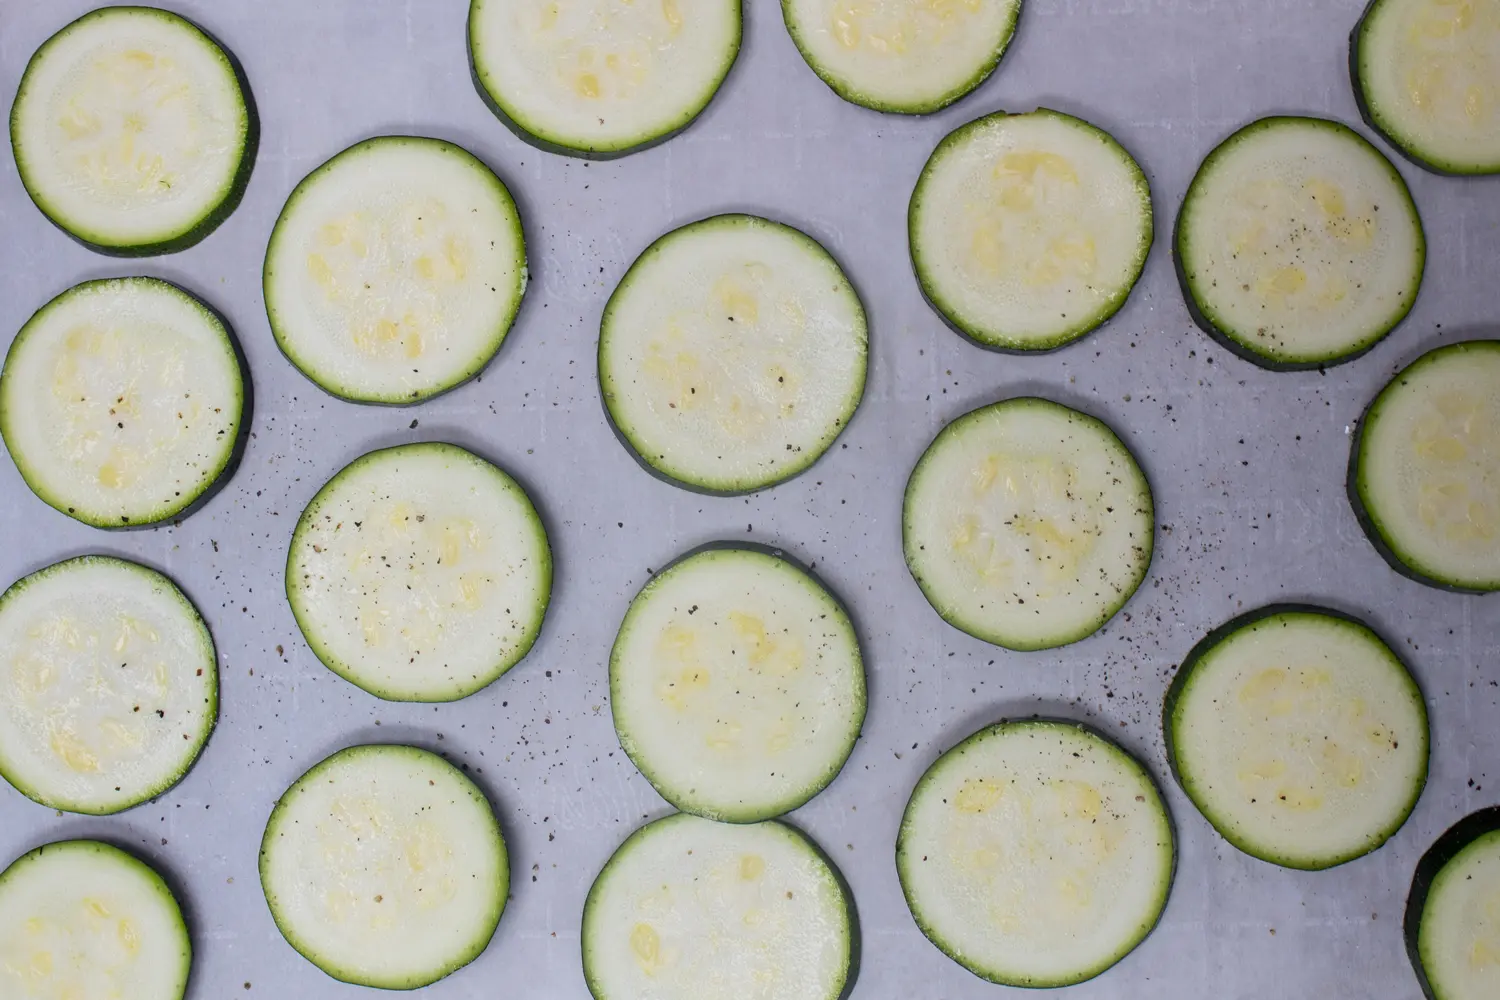 zucchini sliced in rounds laid out on baking sheet and seasoned with salt and pepper